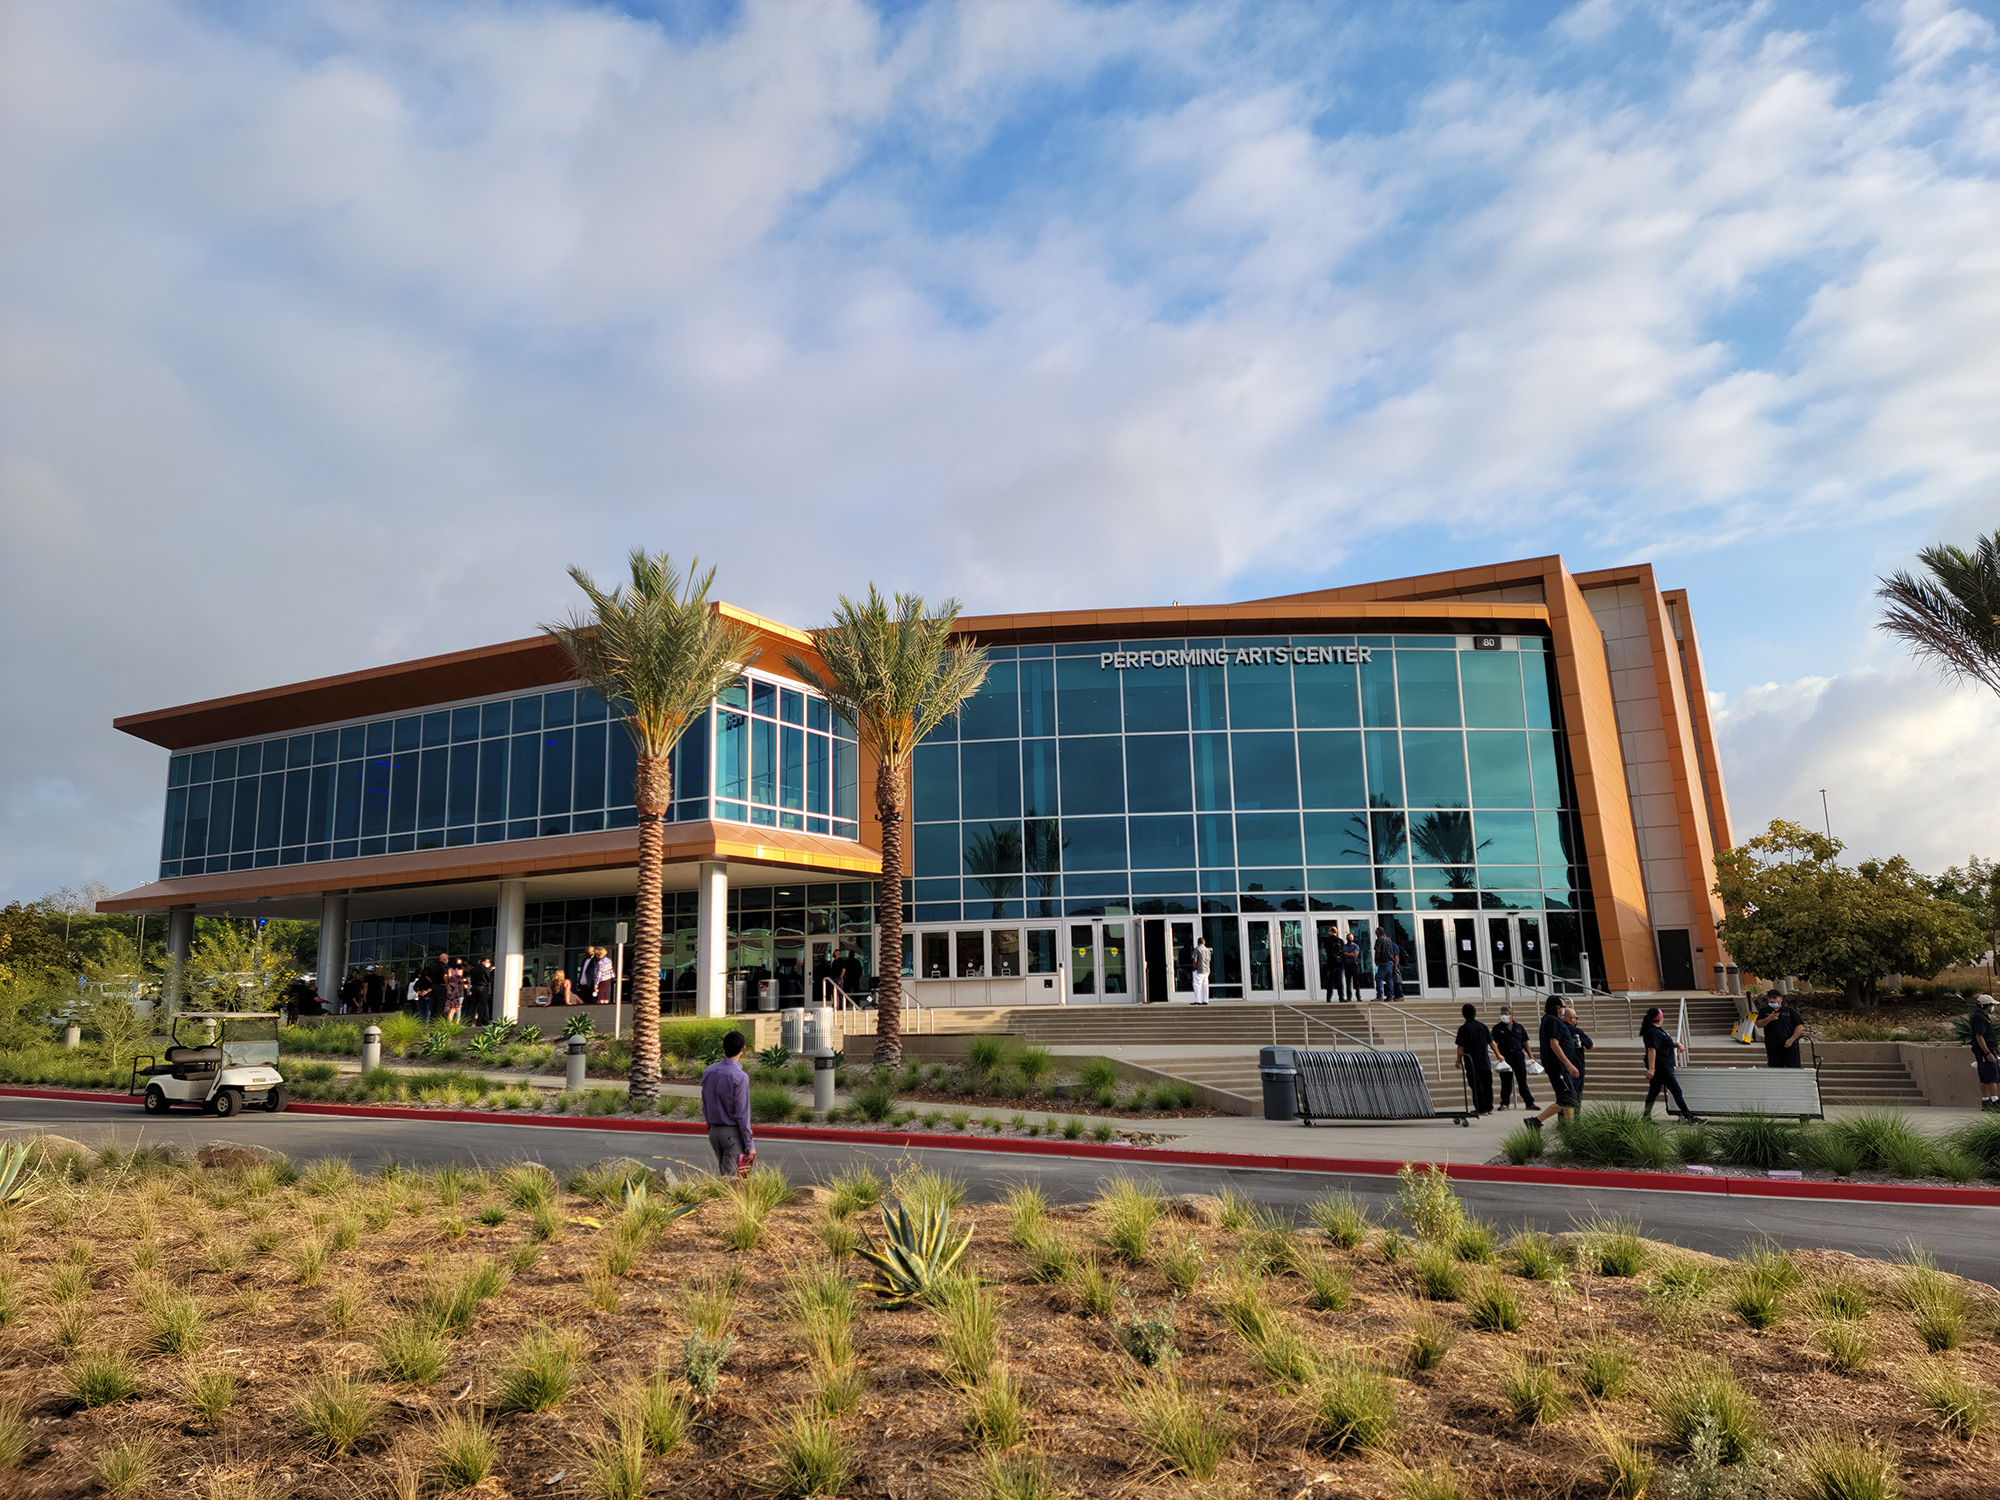 SWCCD Performing Arts Center San Diego Coffman Engineers 4 